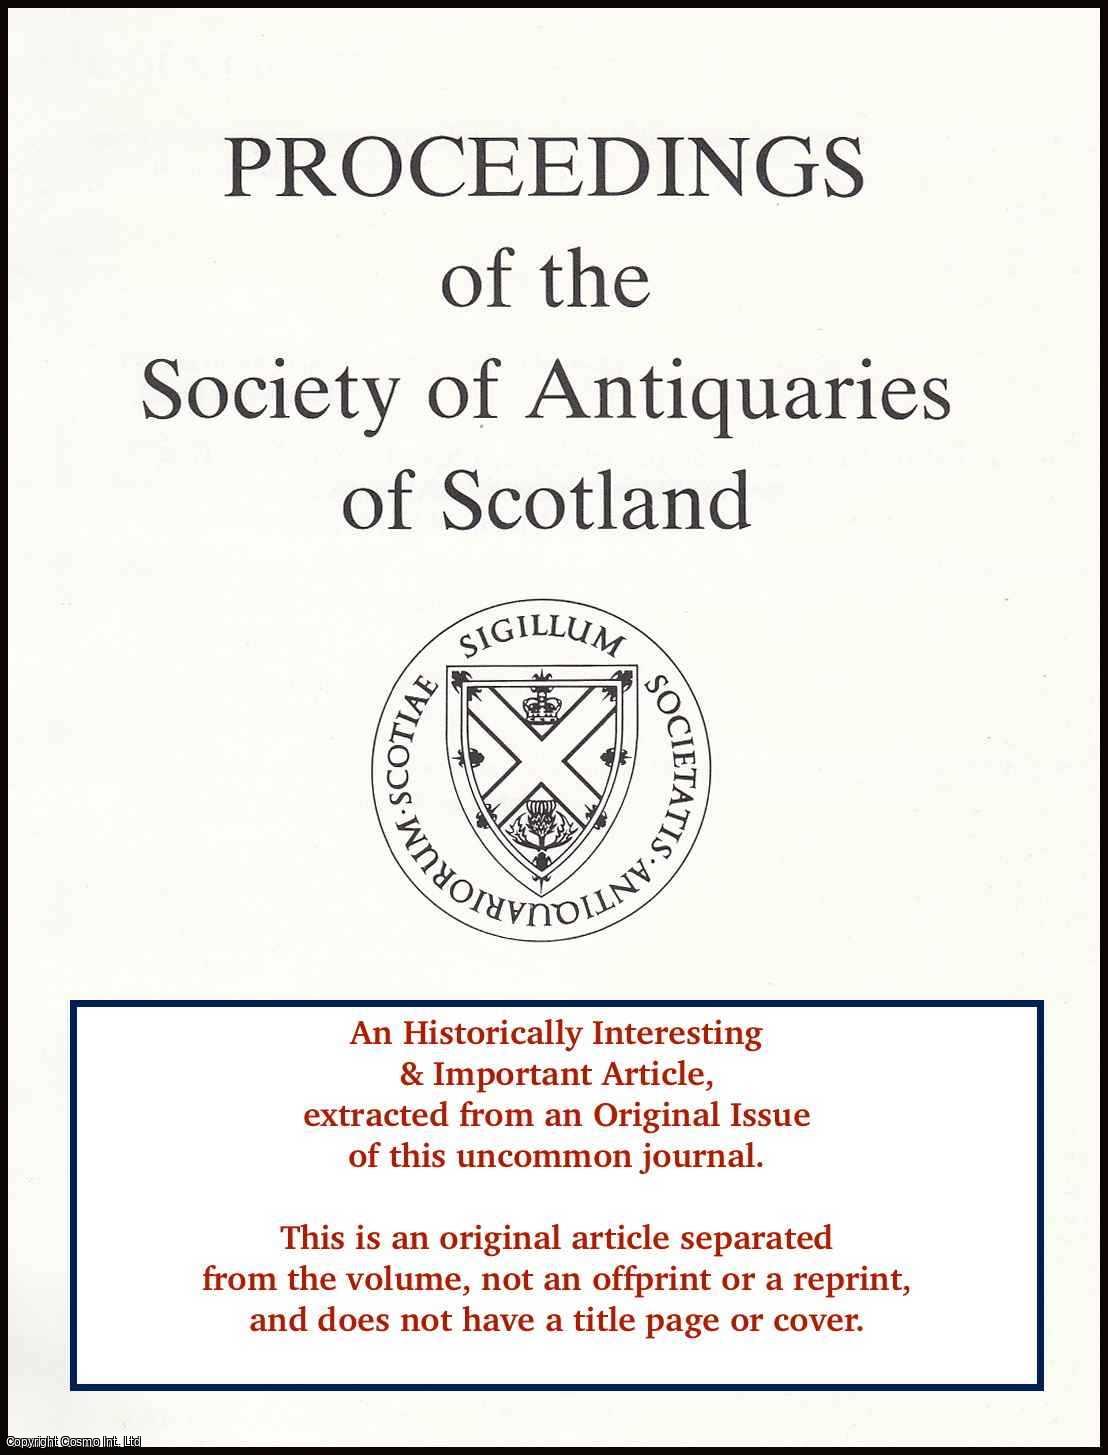 R.G. Lamb - The Cathedral of Christchurch and The Monastery of Birsay. An original article from the Proceedings of the Society of Antiquaries of Scotland, 1974.